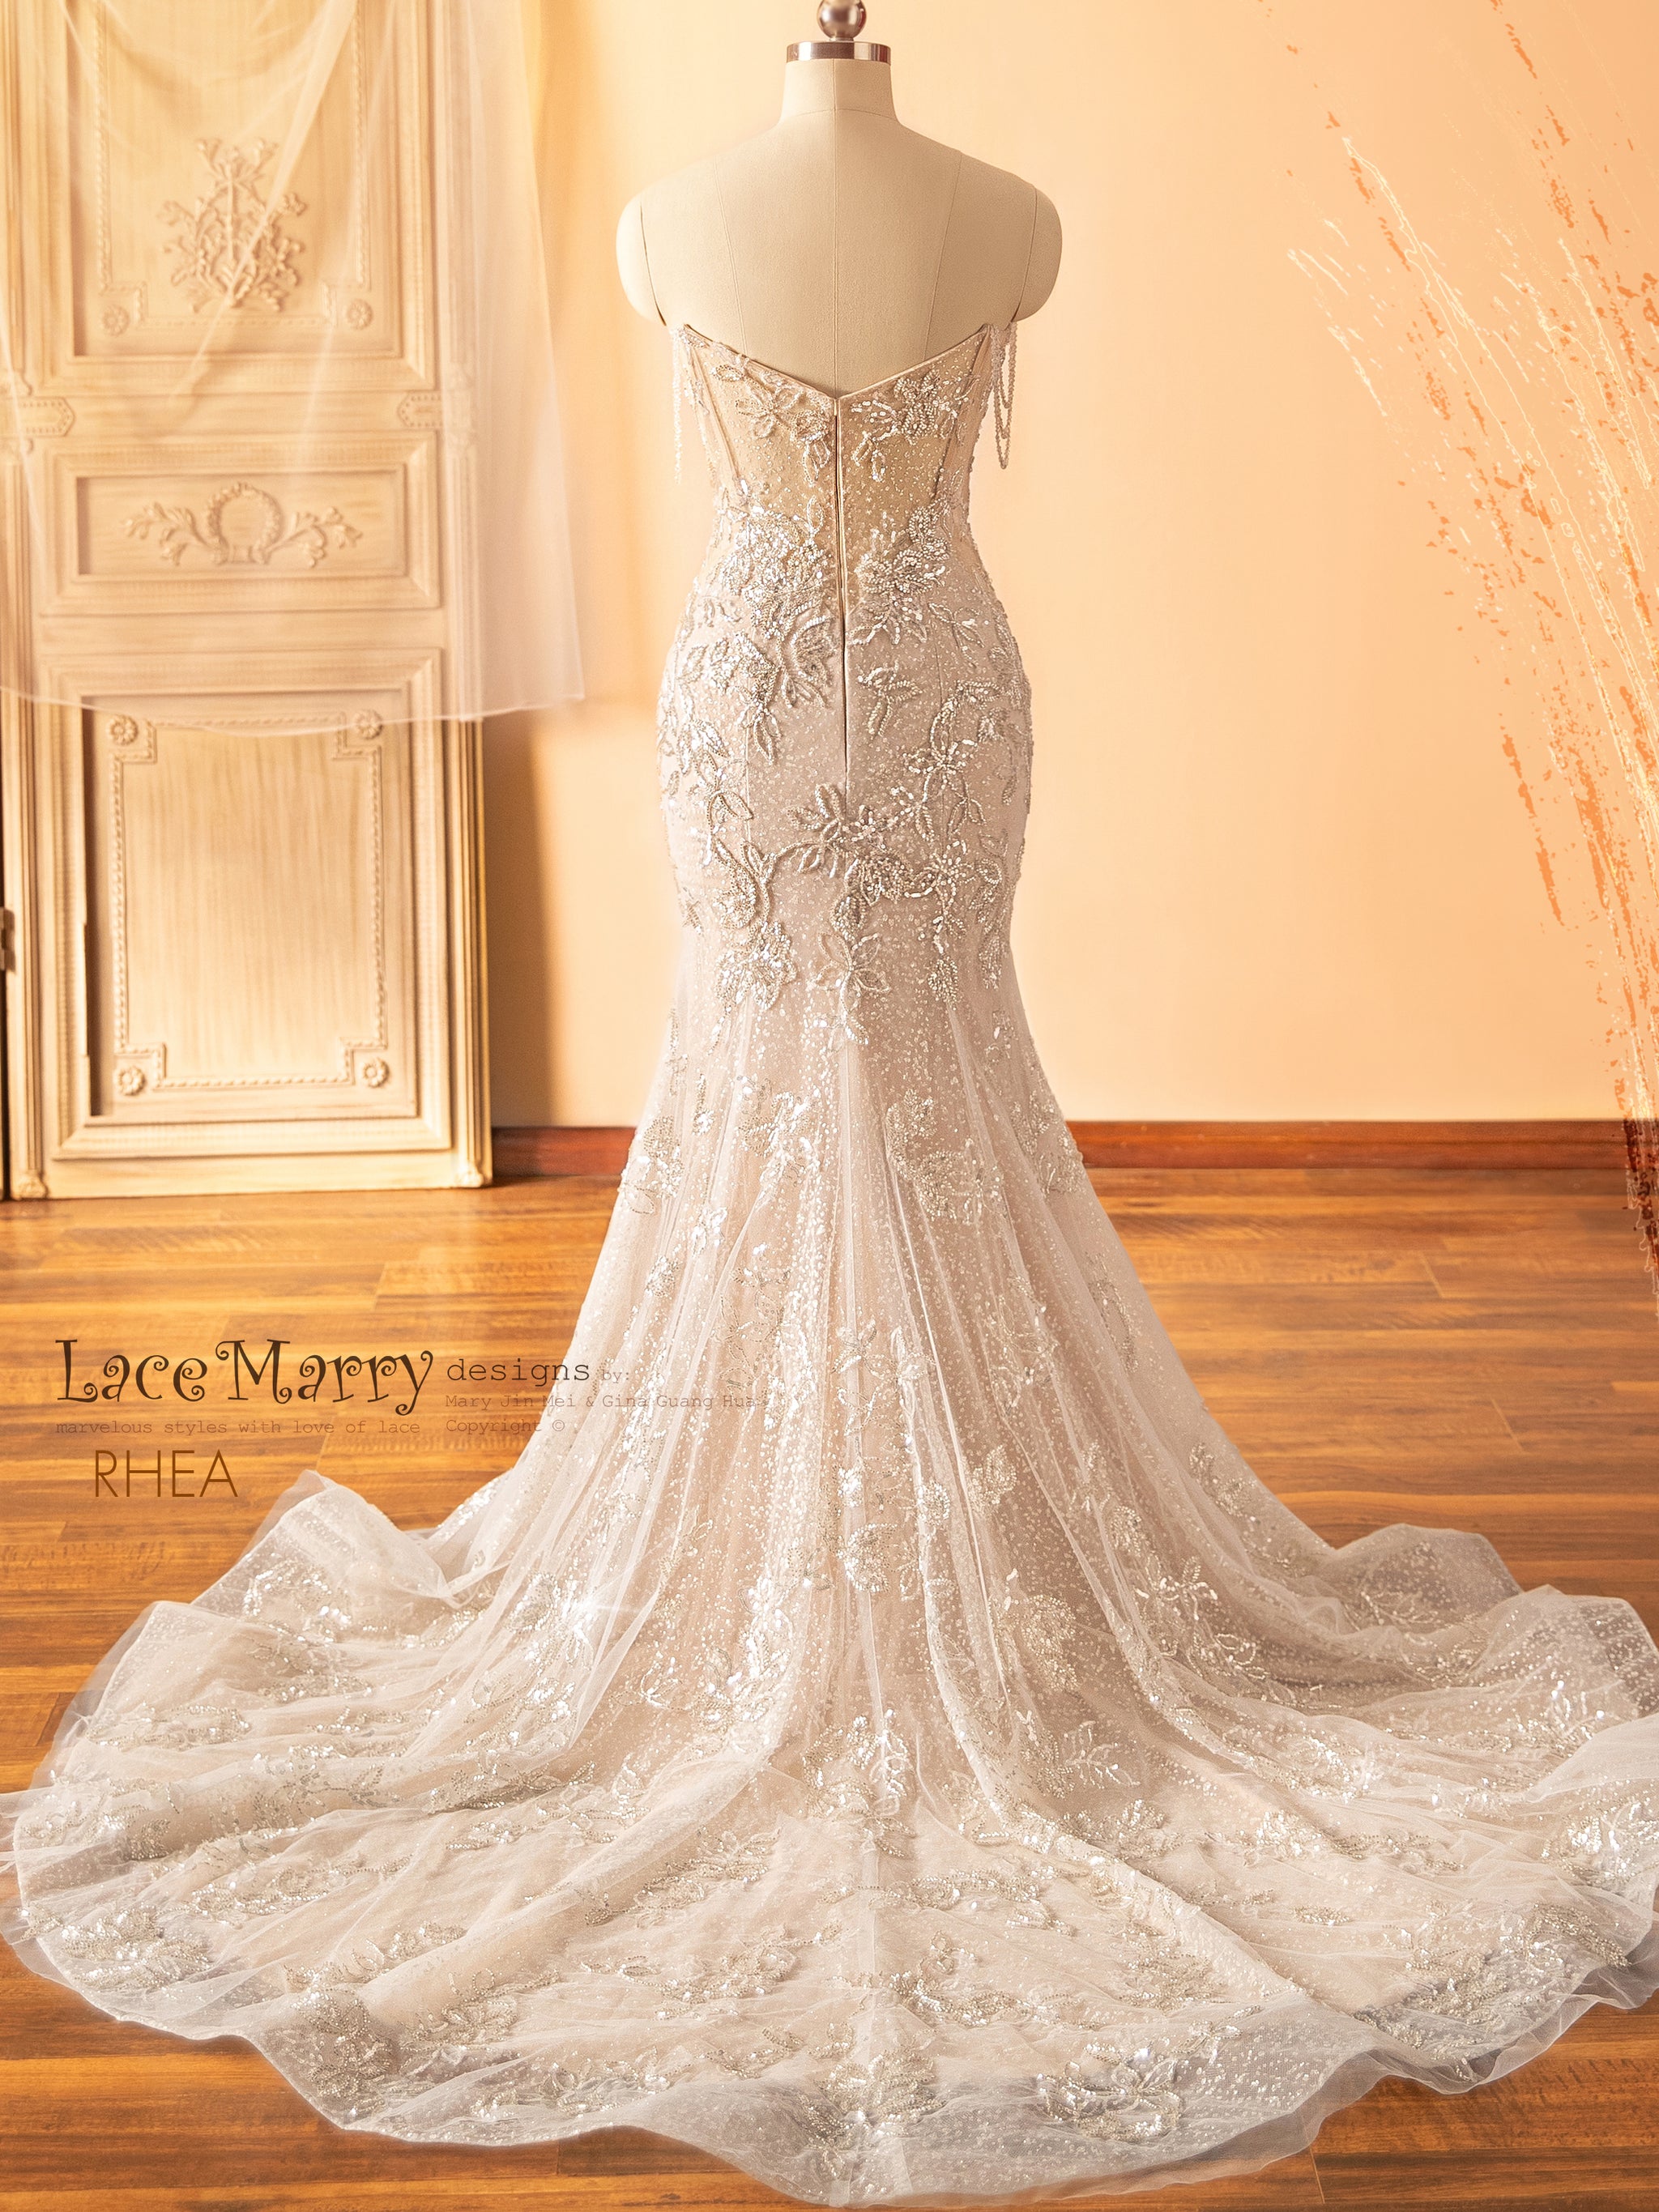 RHEA / Glitter Wedding Dress with Beaded Straps - LaceMarry